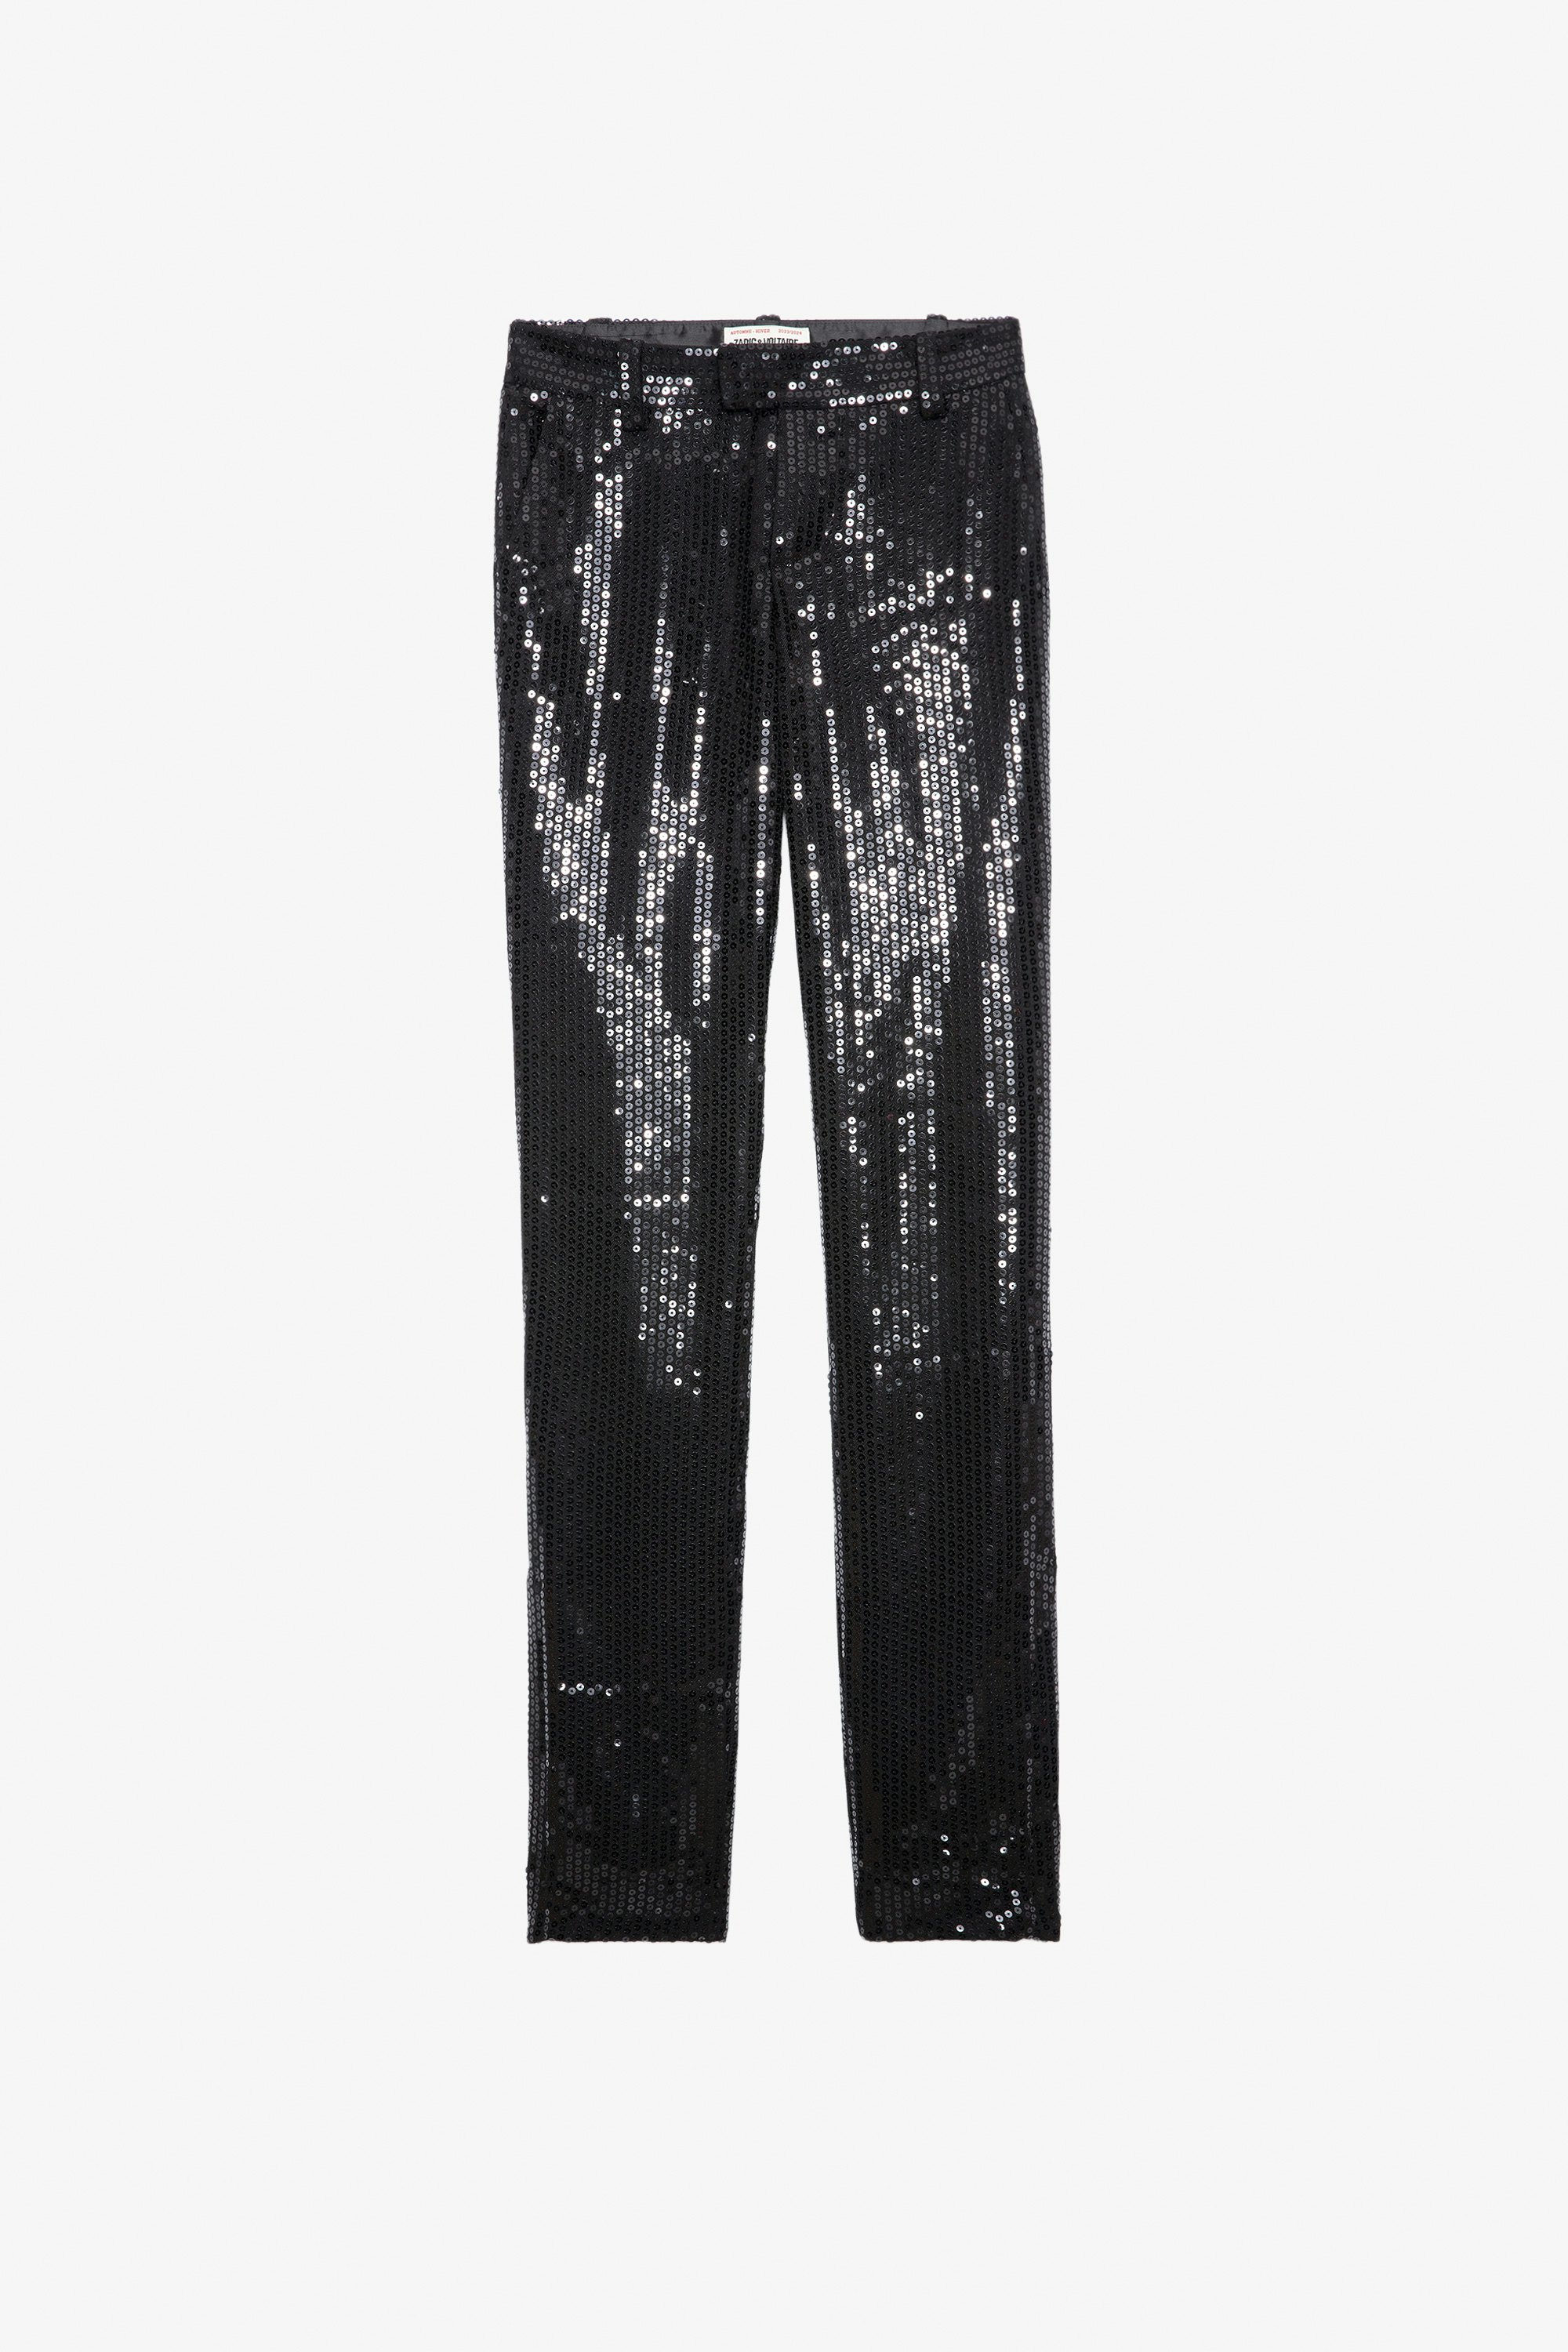 Prune Sequin Trousers - Women’s black tailored trousers with sequins, pockets and zip hem.